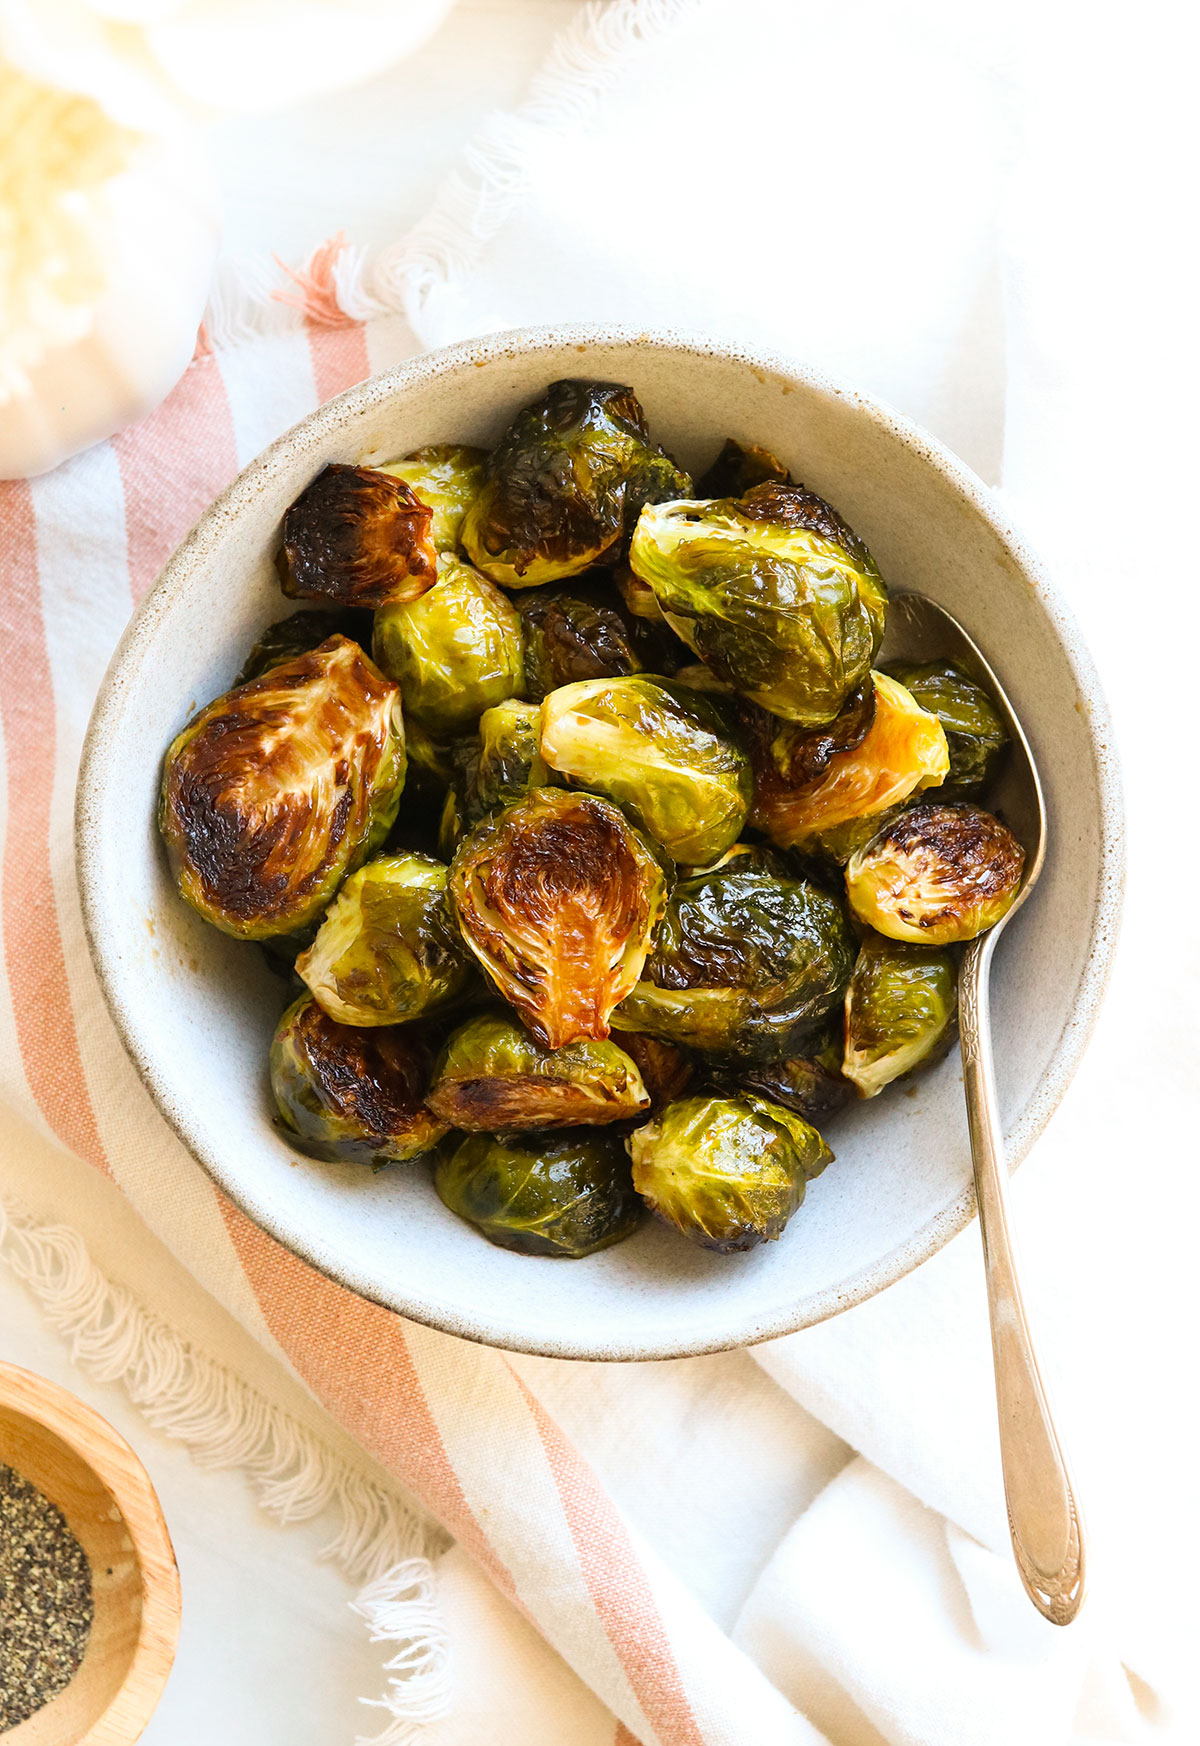 balsamic brussels sprouts served in a small bowl with spoon.